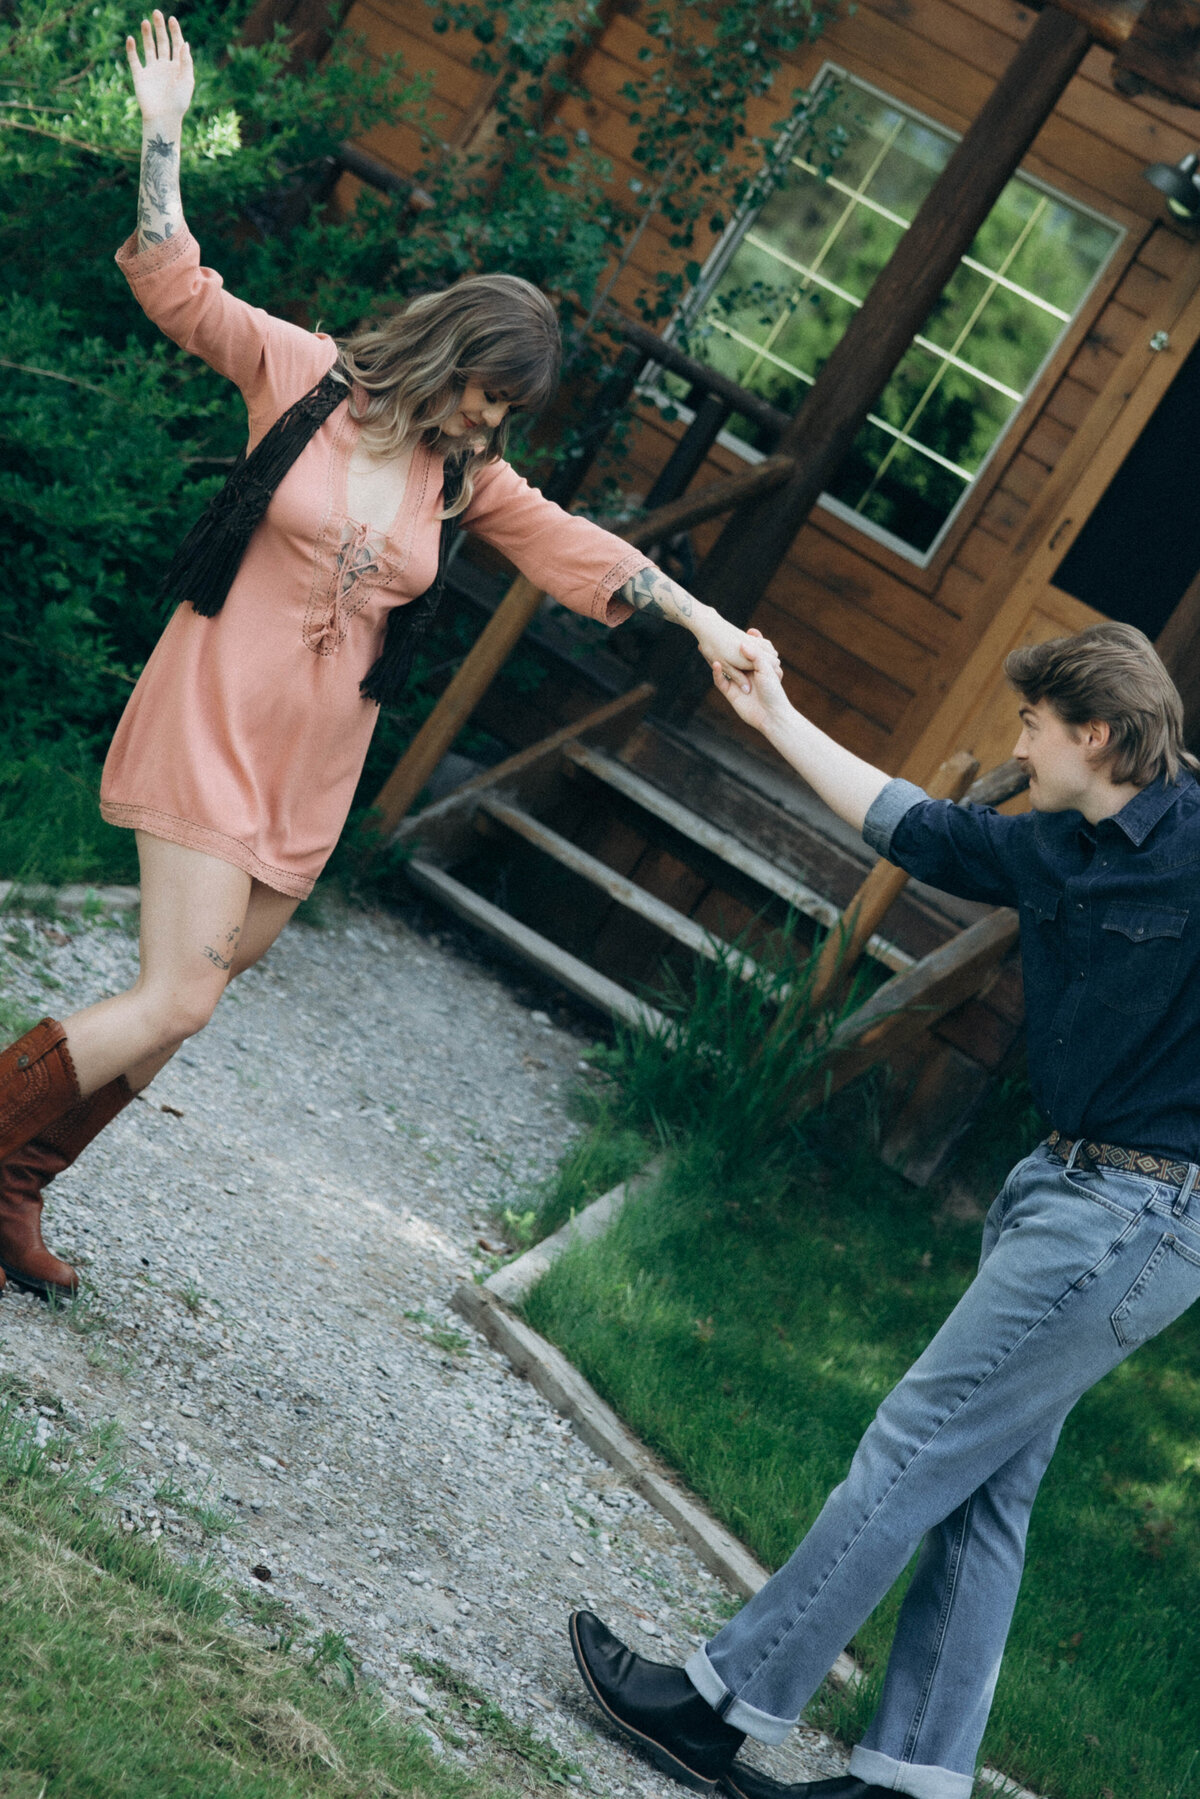 vpc-couples-vintage-cabin-shoot-18